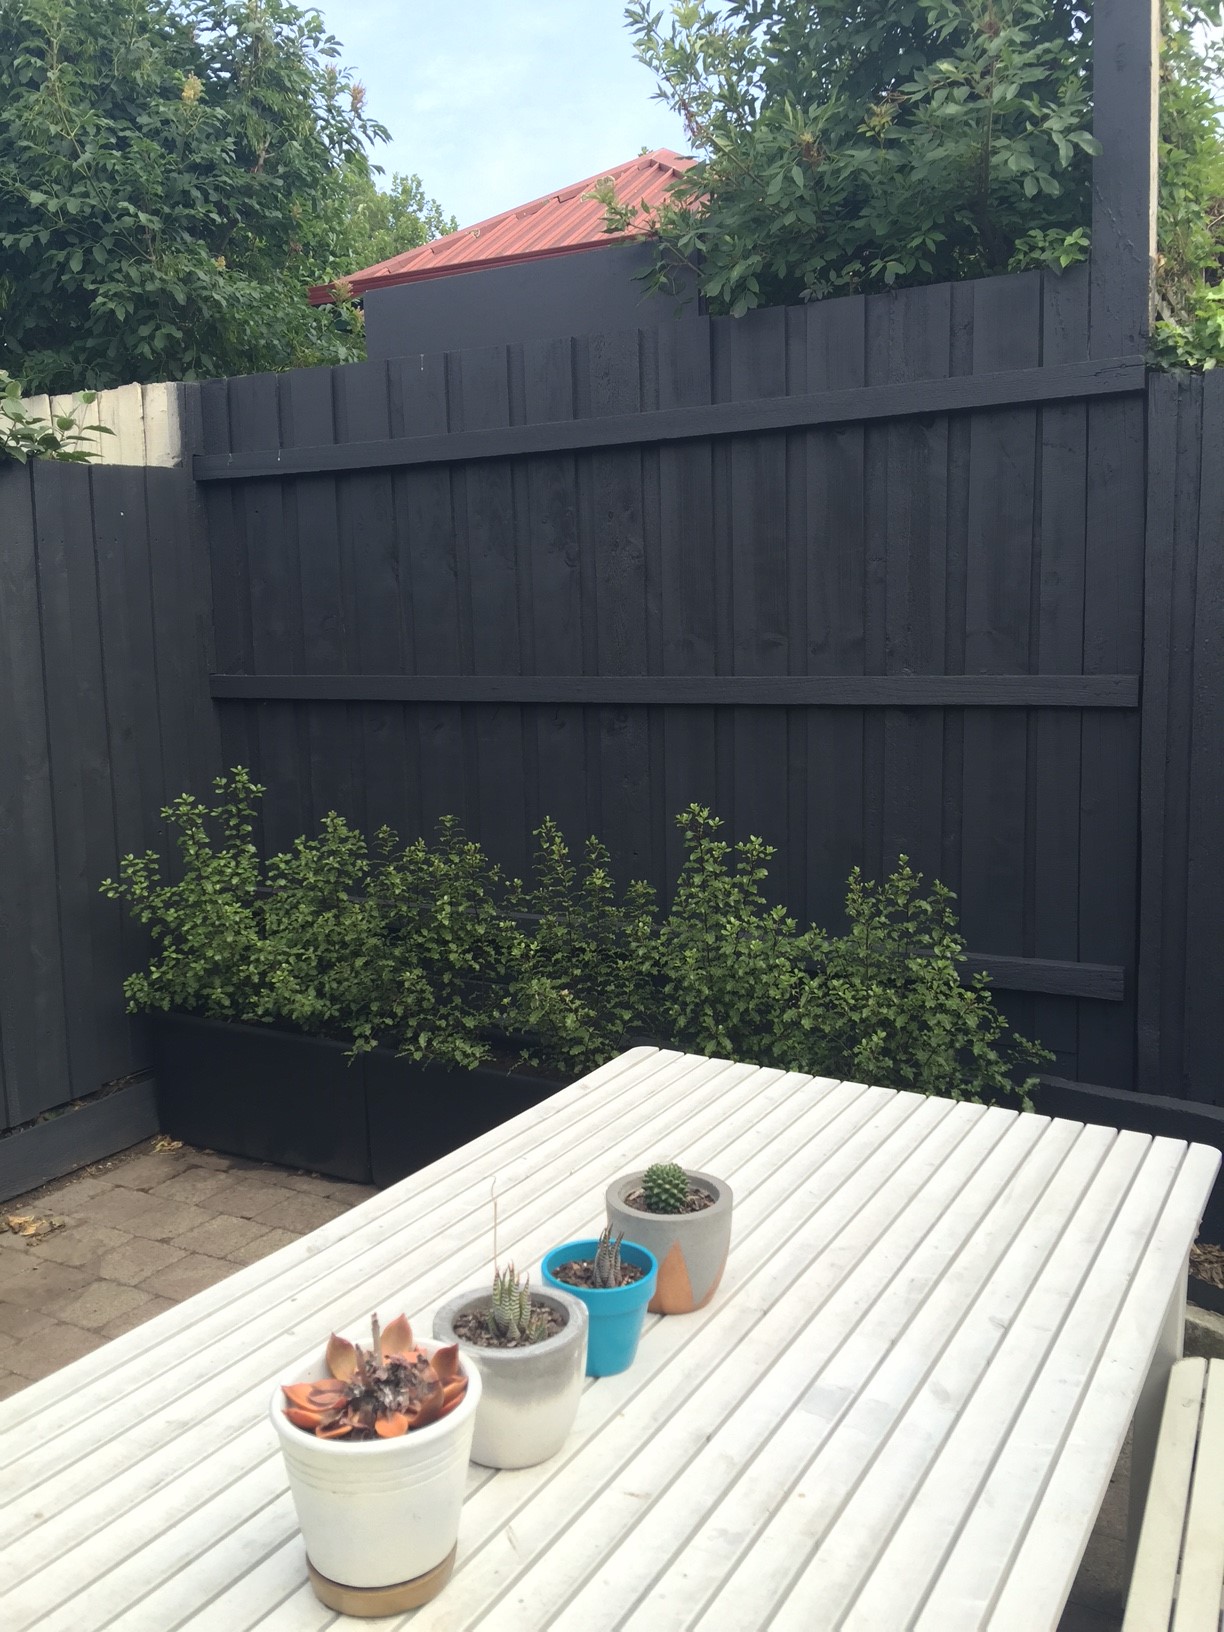 Fence makeover by spray painting | Bunnings Workshop community